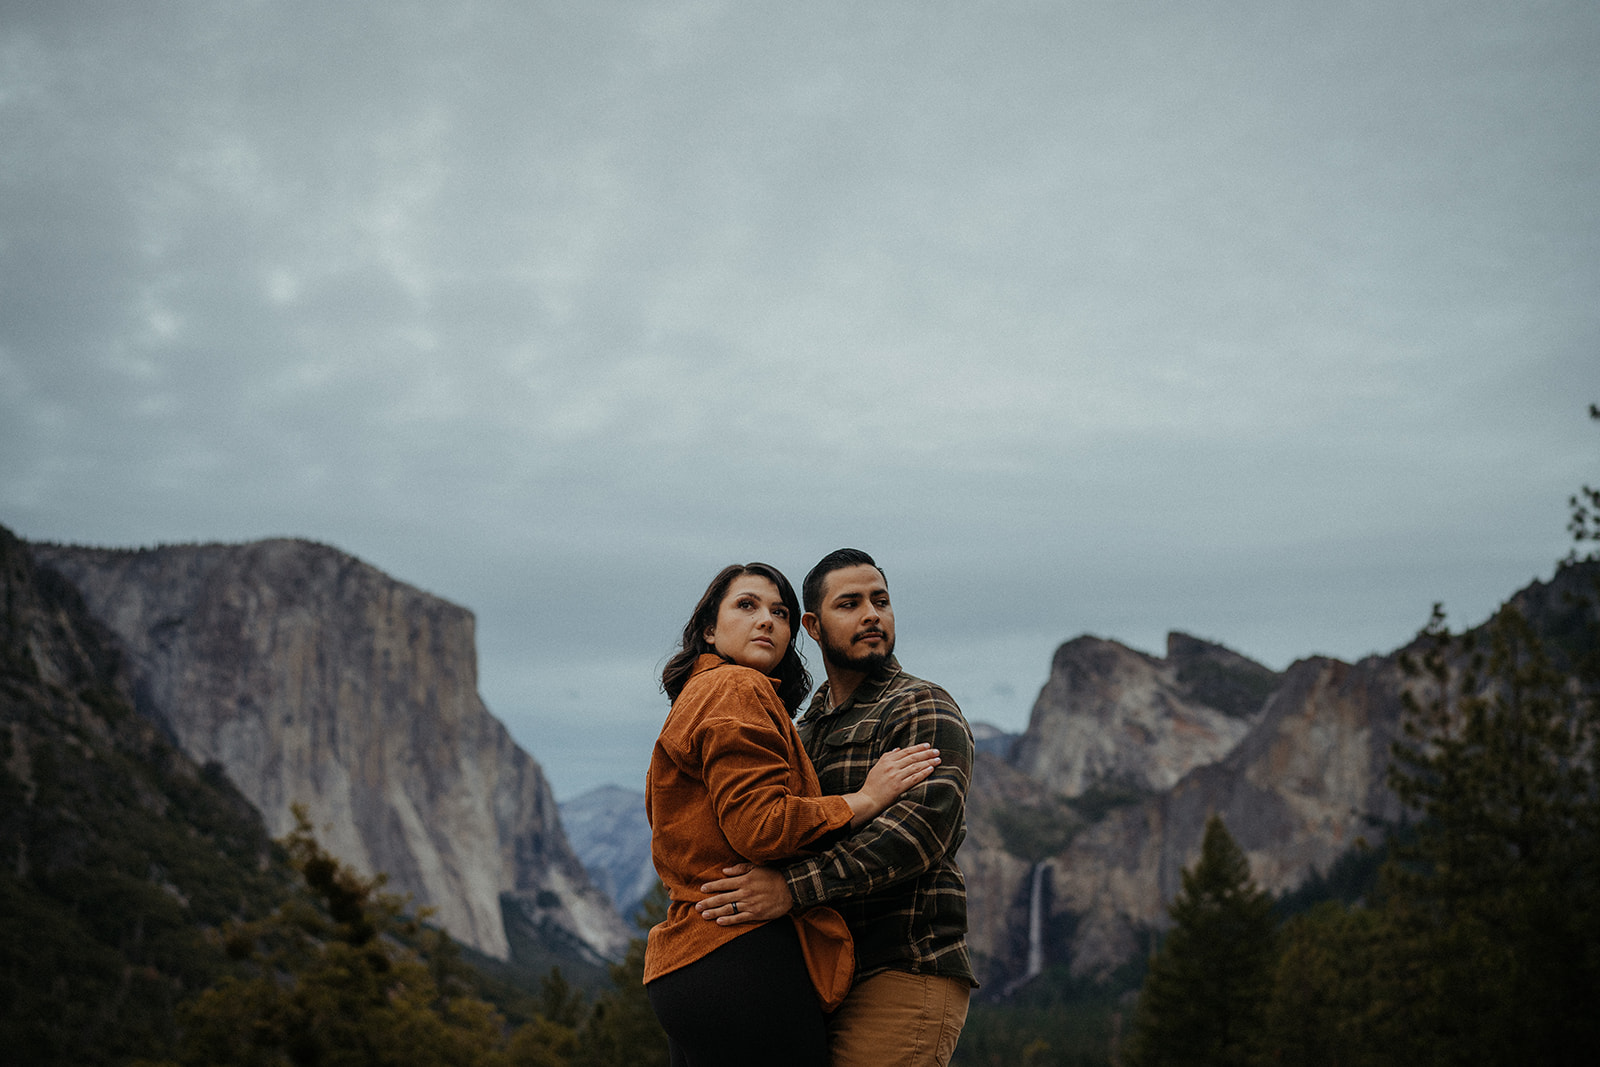 Adventurous couple embracing each other against the breathtaking backdrop of Yosemite National Park. The iconic Tunnel View frames the scene, showcasing majestic granite cliffs and towering trees on a gloomy yet atmospheric day.